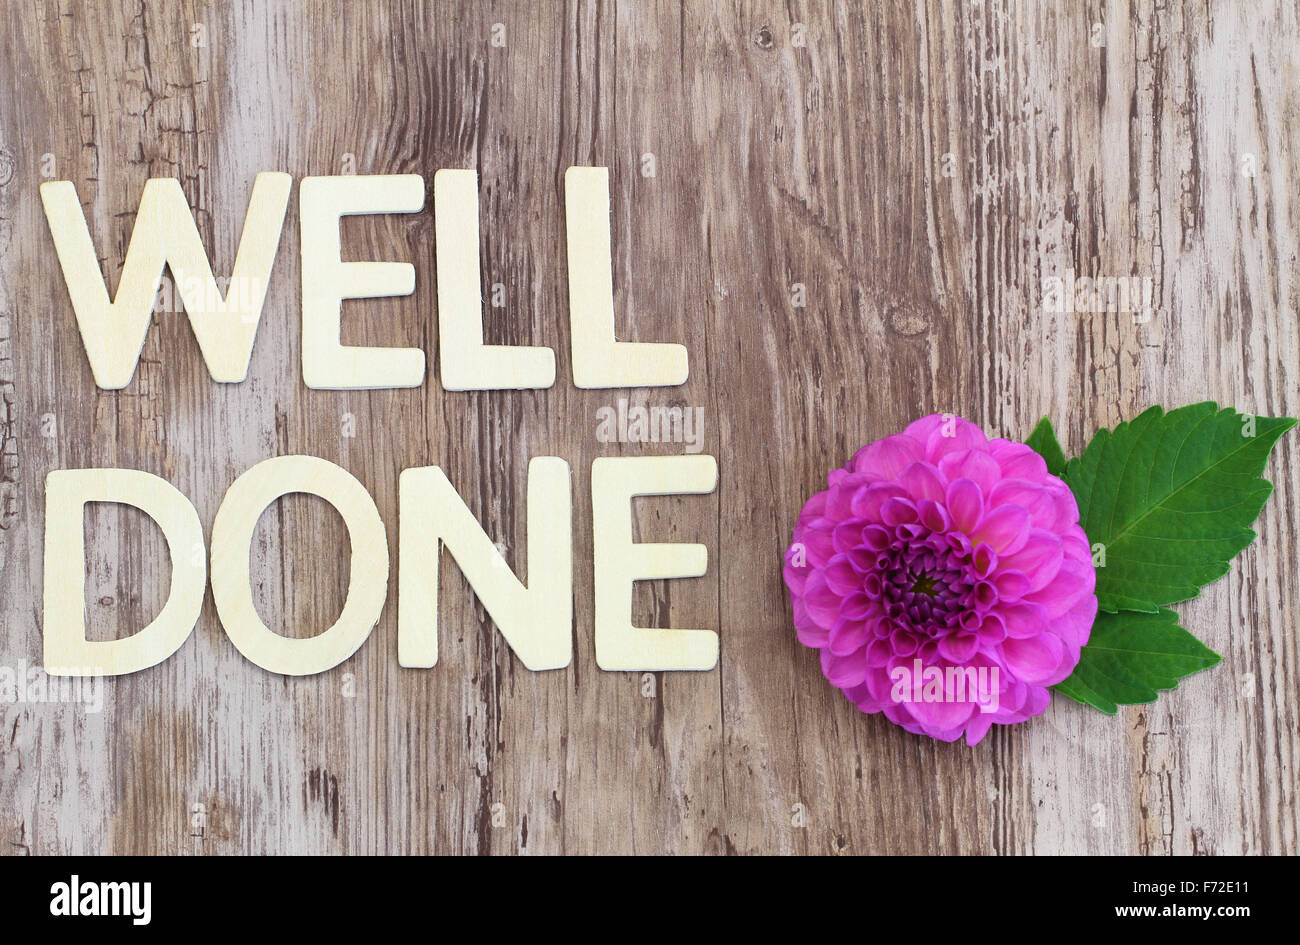 Well done written with wooden letters on rustic surface and dahlia flower Stock Photo